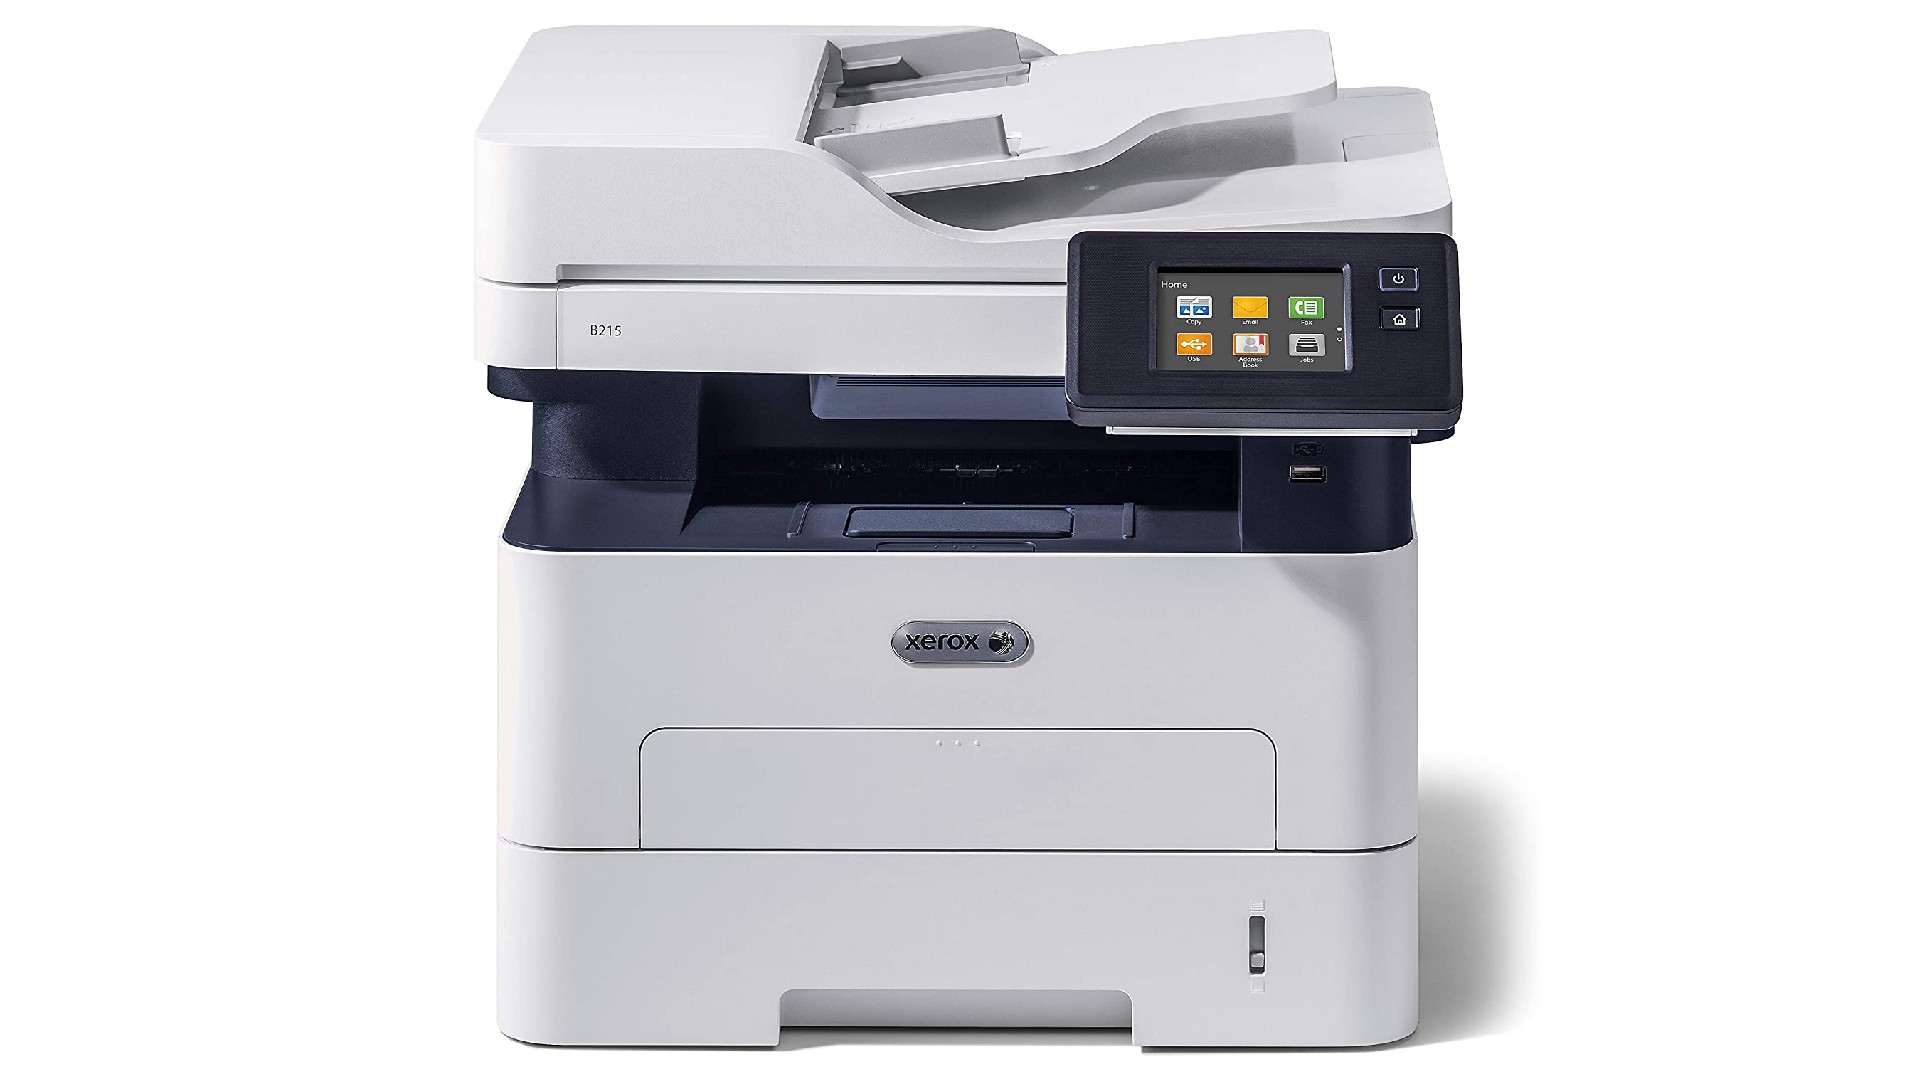 Product shot of the Xerox B215, one of the best all-in-one printers